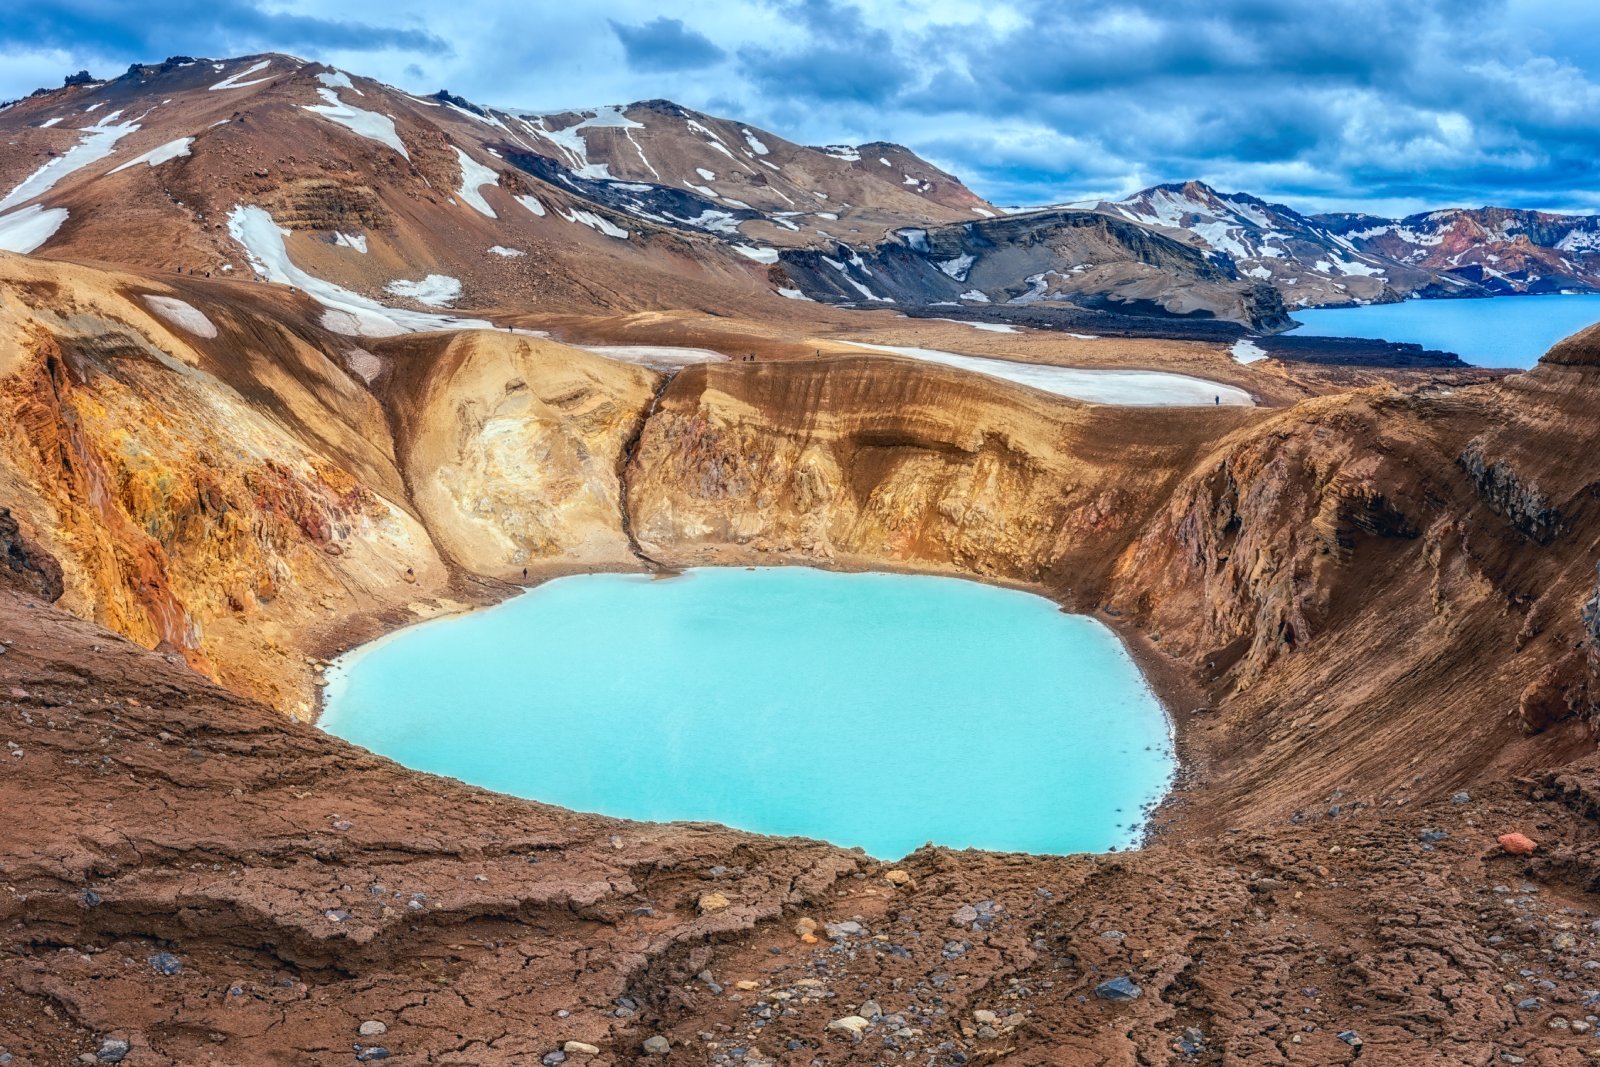 <p class="wp-caption-text">Image Credit: Shutterstock / Uhryn Larysa</p>  <p><span>The Askja Caldera, located in the remote central highlands of Iceland, is a stark and otherworldly landscape that offers a glimpse into the volcanic forces that shape the island. The caldera is part of the larger Dyngjufjöll mountain range. It contains several volcanic craters, including the striking Víti crater, which holds a geothermal lake of milky blue water.</span></p>